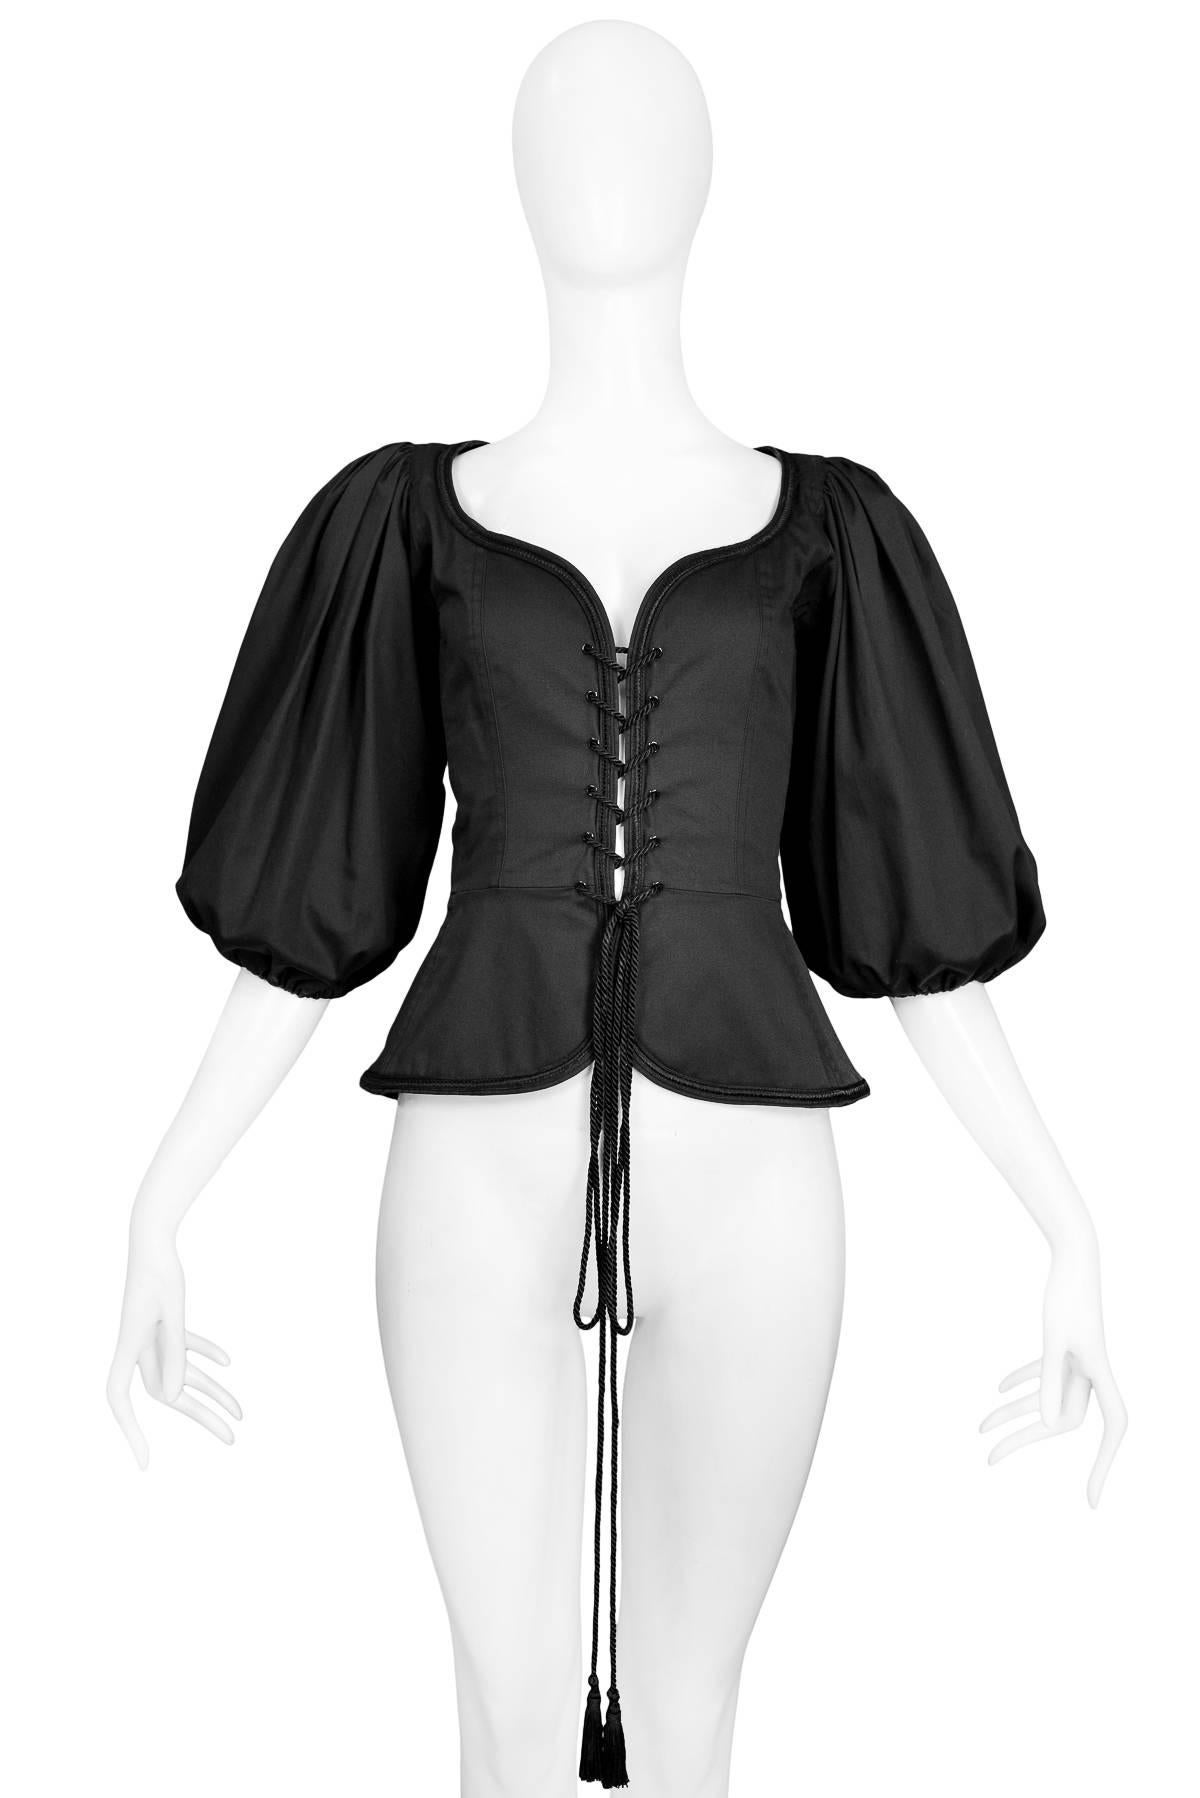 Saint Laurent Chrocet Wool Top in Black Womens Clothing Lingerie Corsets and bustier tops 